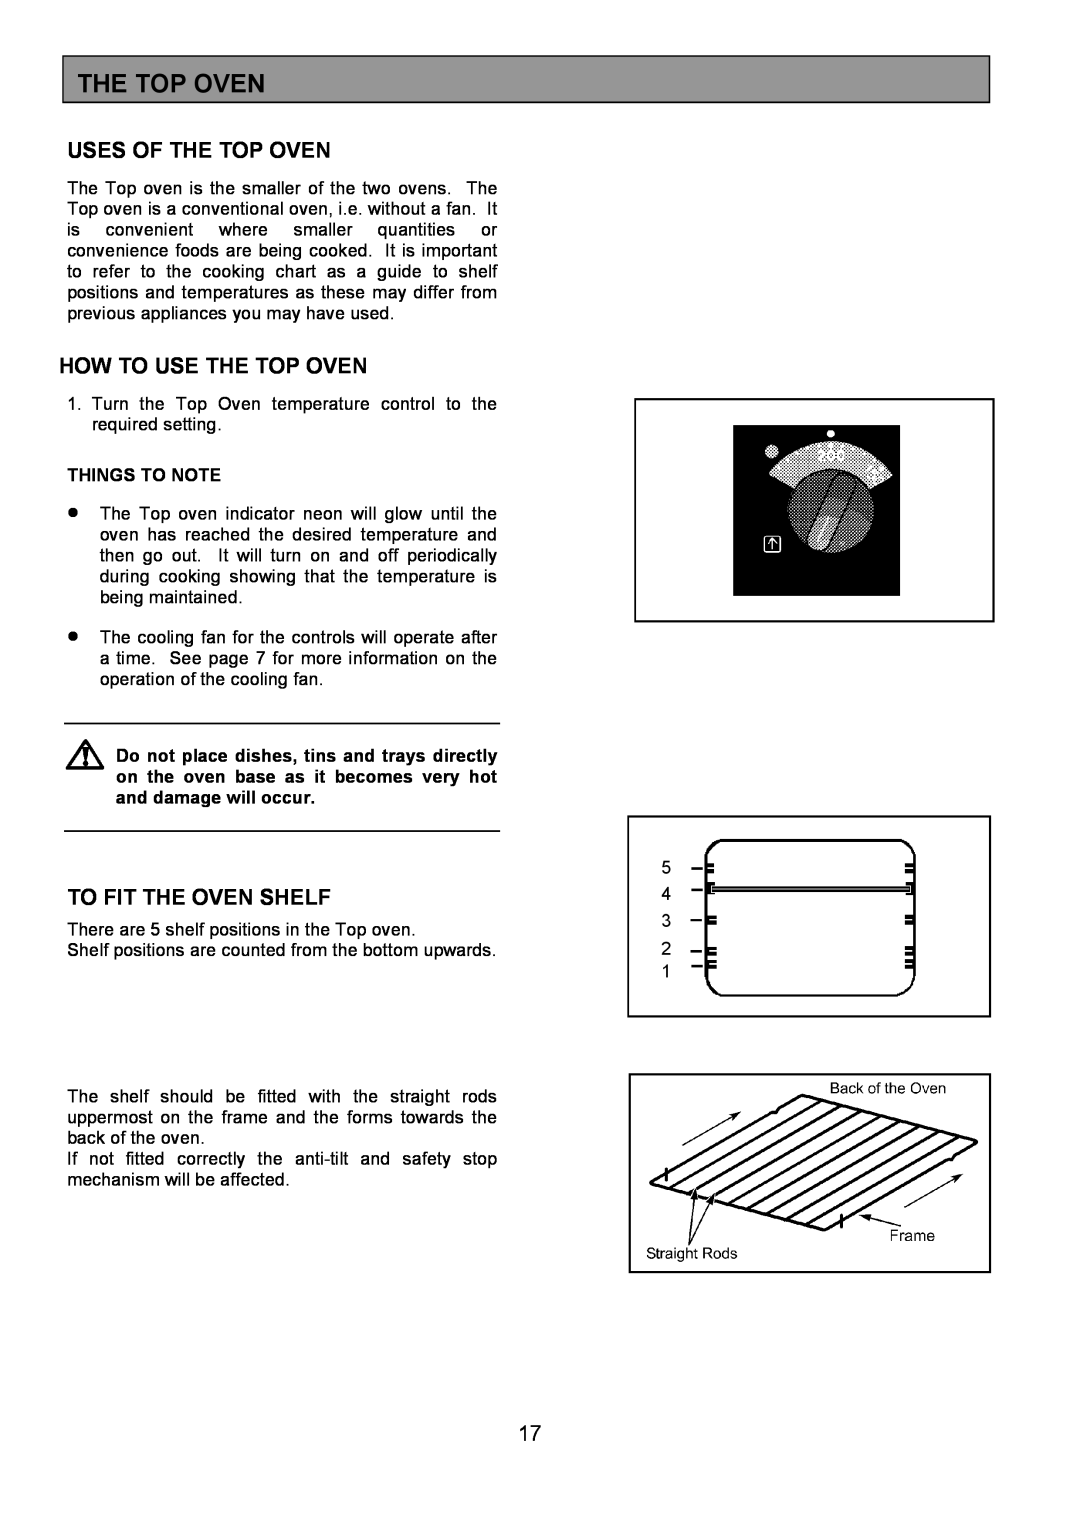 AEG 3210 BU Uses Of The Top Oven, How To Use The Top Oven, To Fit The Oven Shelf, Things To Note 